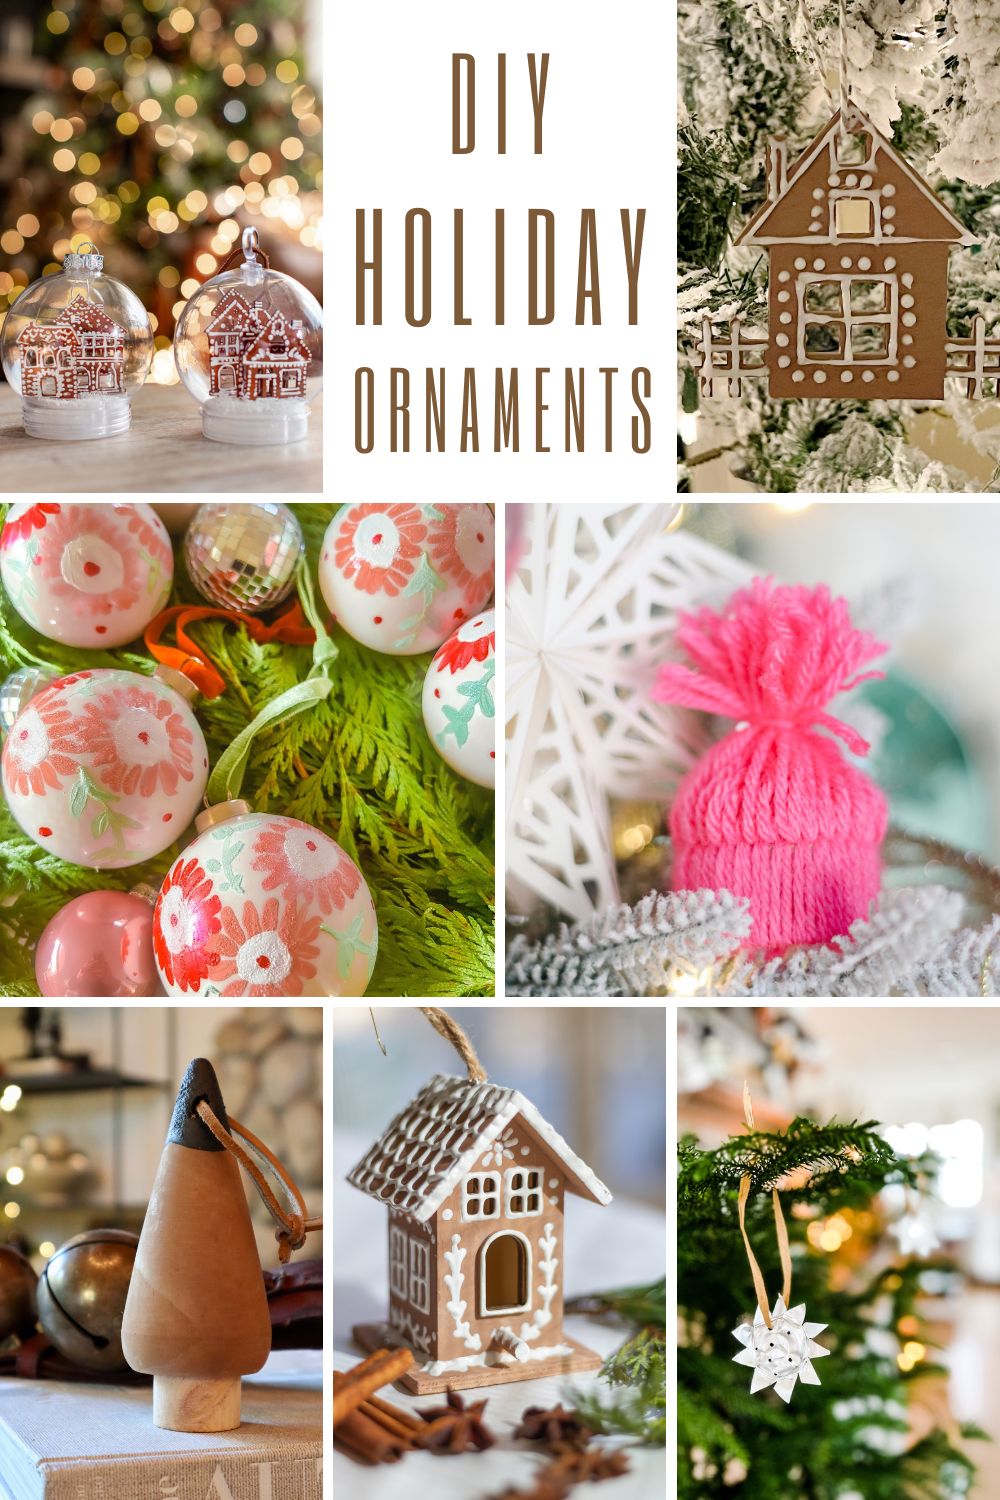 I love everything gingerbread. I love gingerbread lattes, cookies, and cake. The gingerbread house wood Christmas ornaments are so much fun!